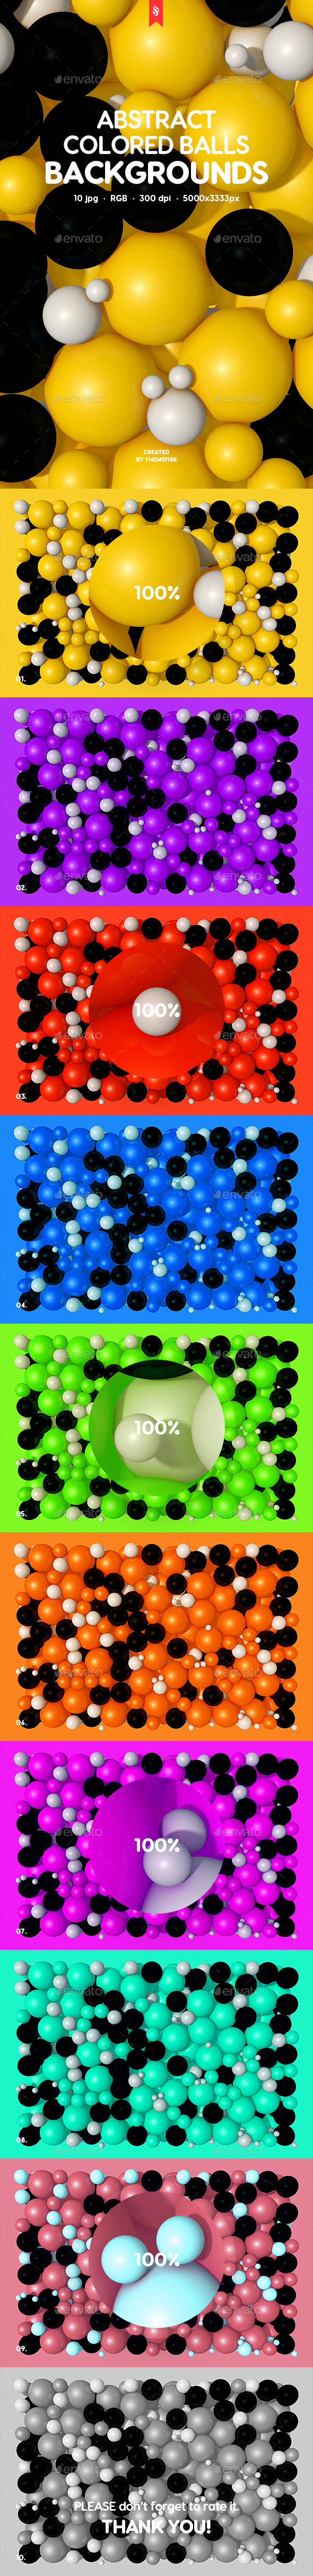 Colored Balls Backgrounds